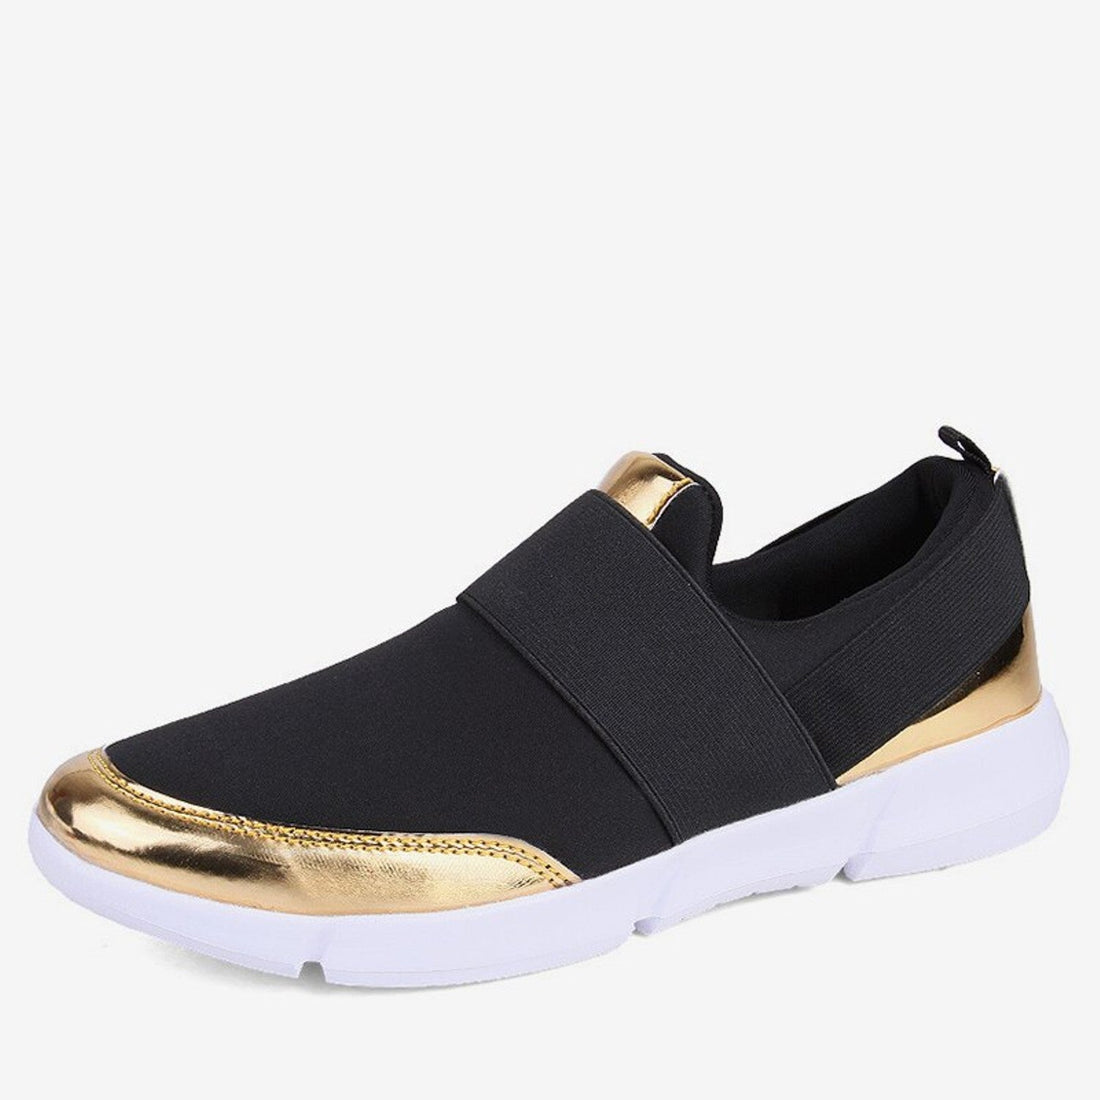 Women's Spring Casual Breathable Sneakers